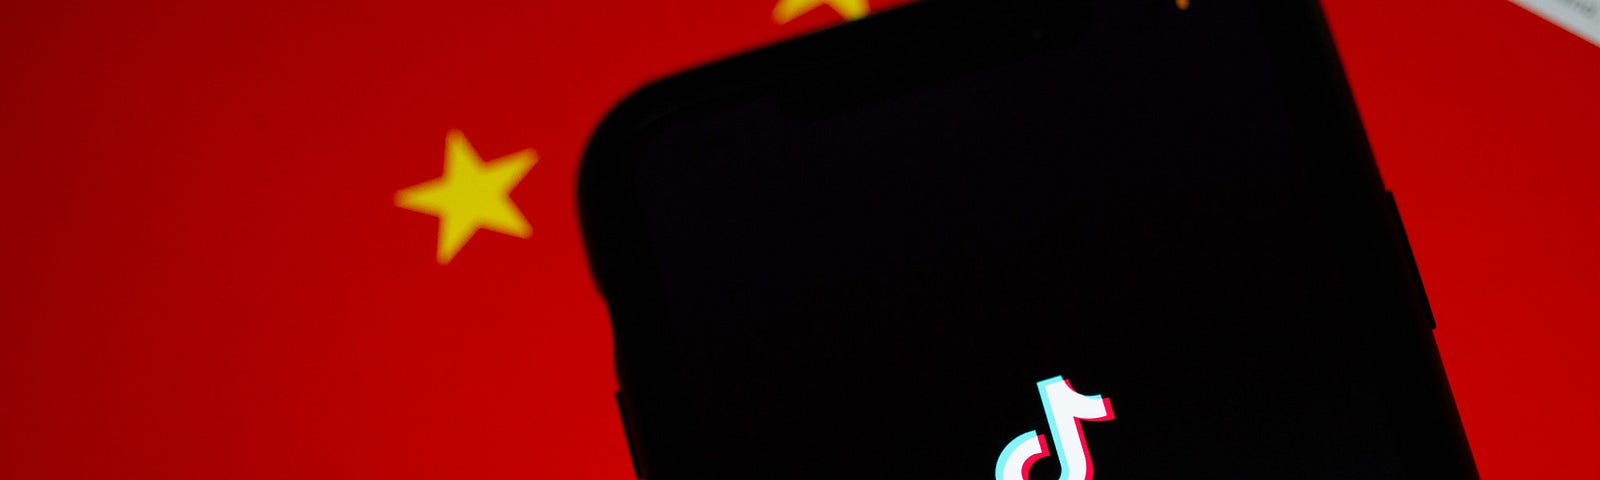 A phone displaying the TikTok logo is placed in front of a Chinese flag.